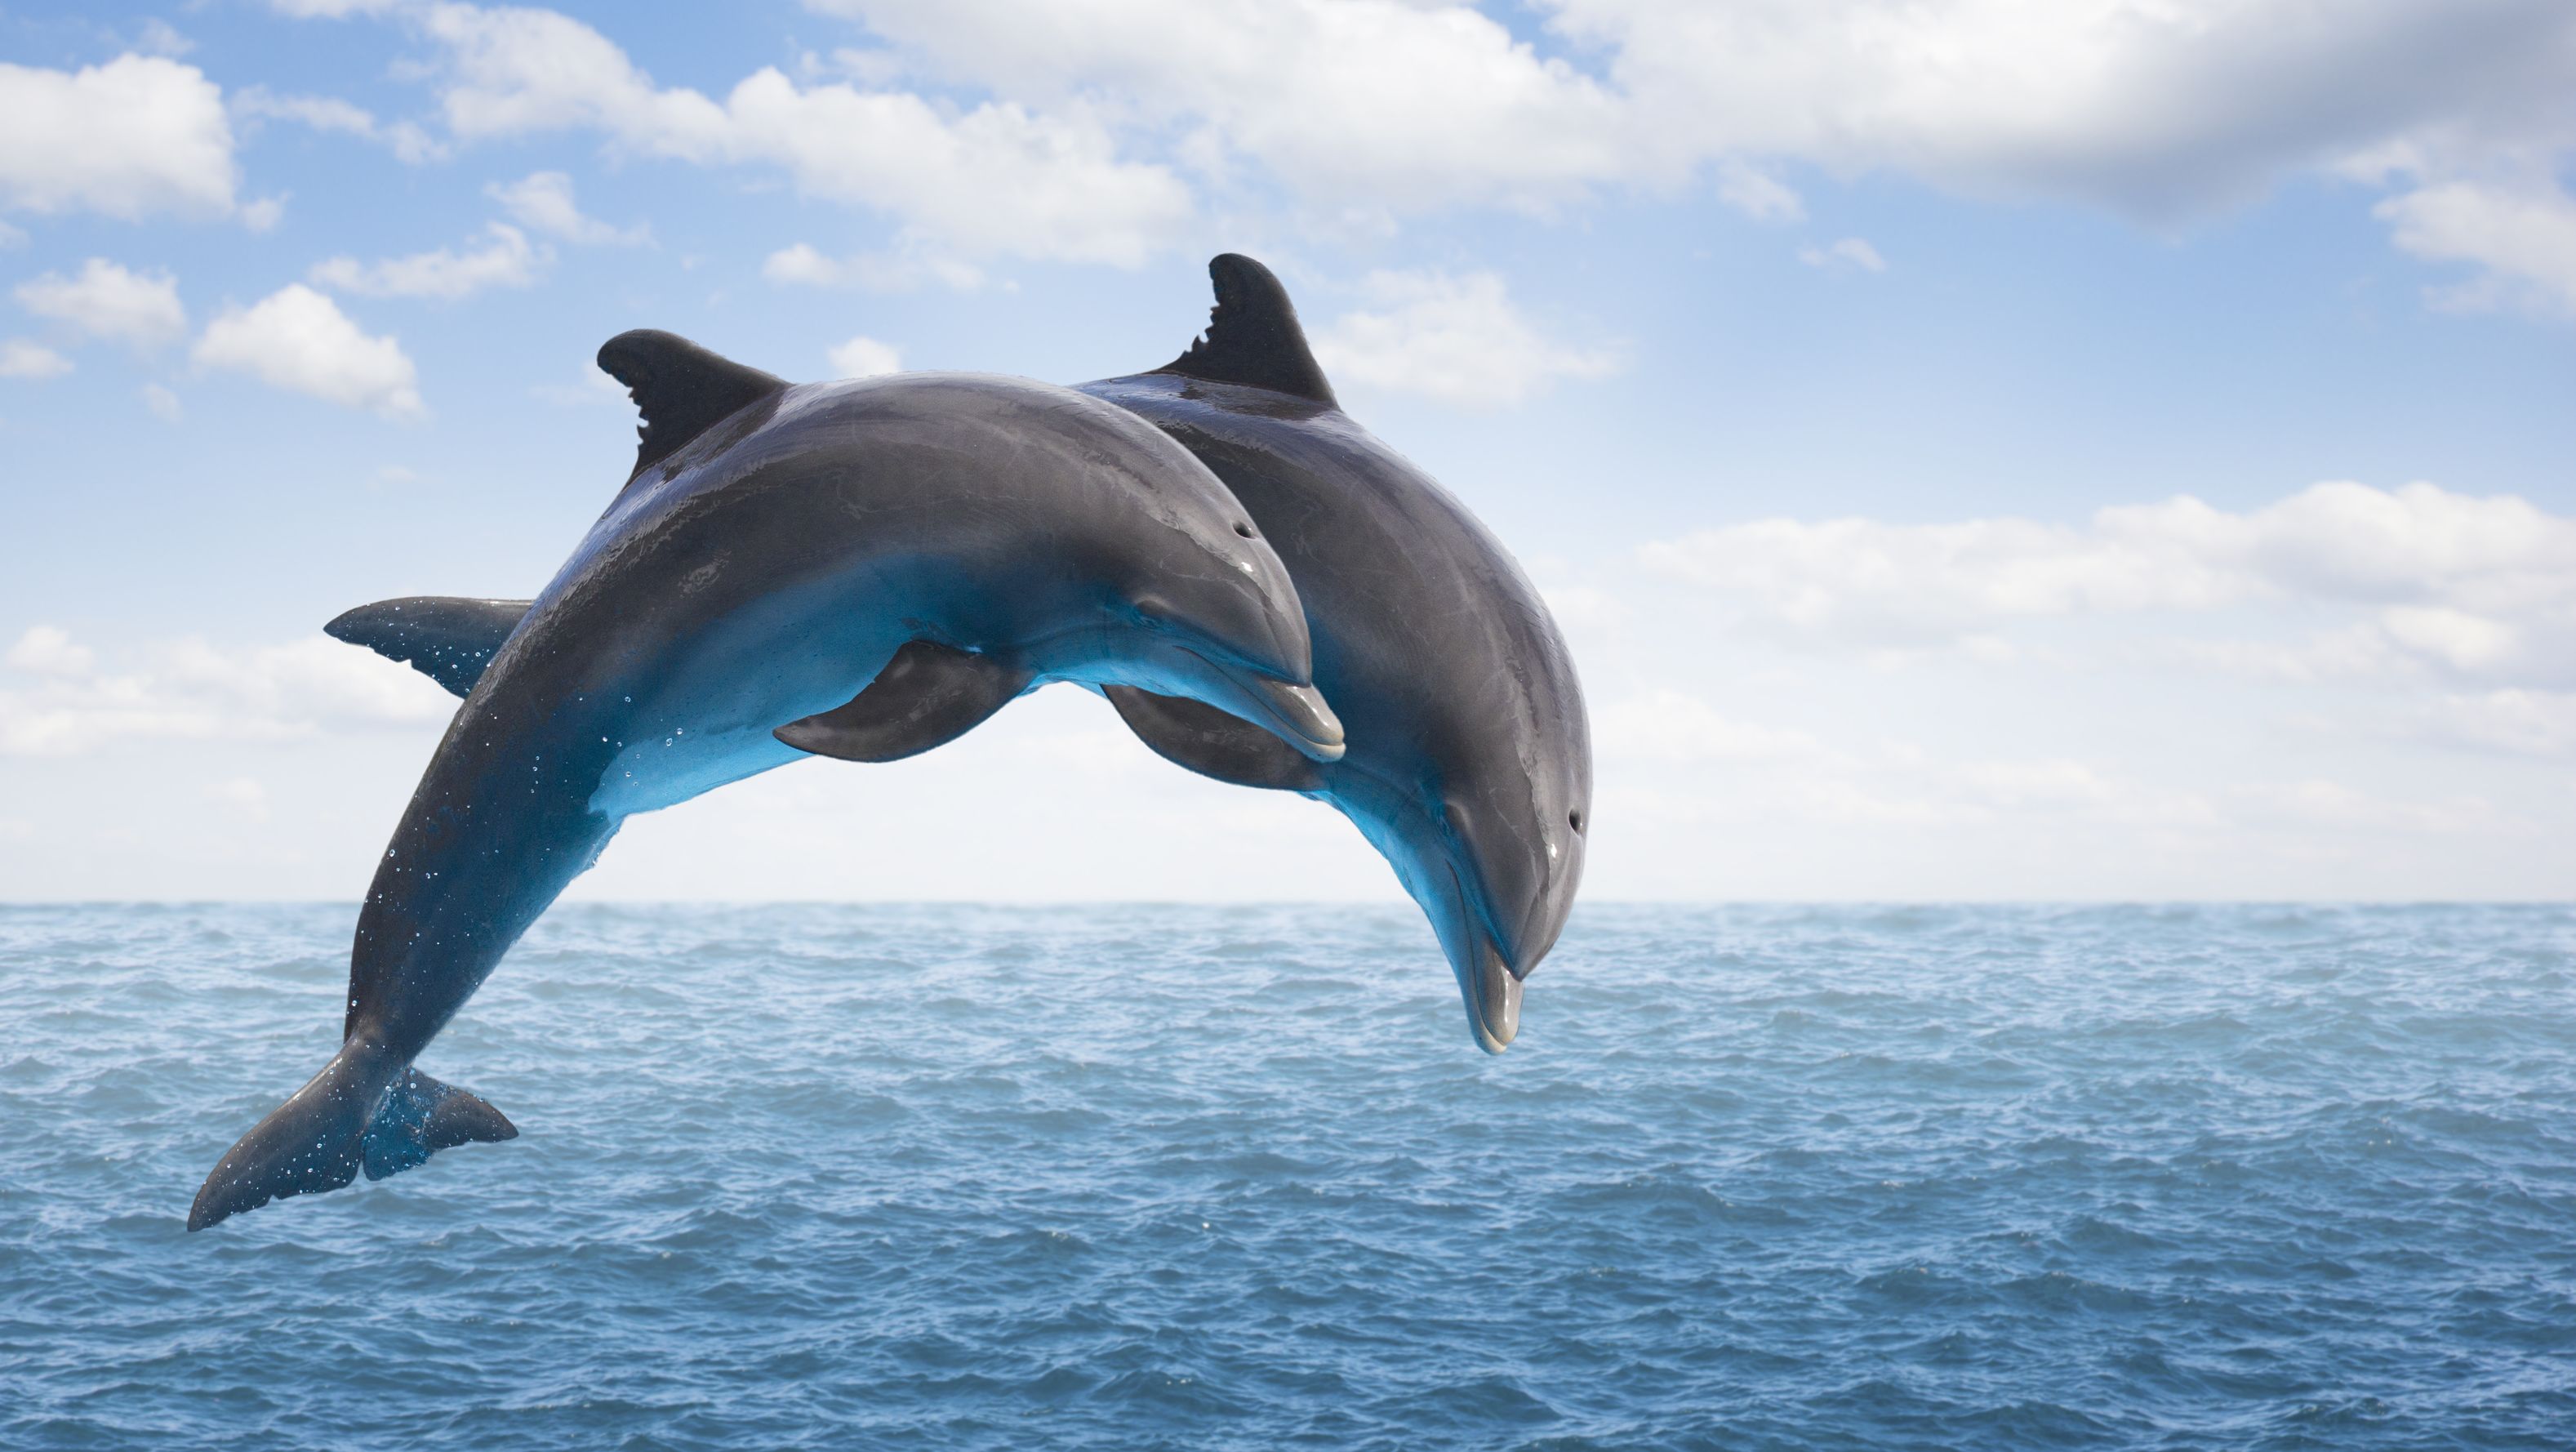 Fun and interesting facts about dolphins